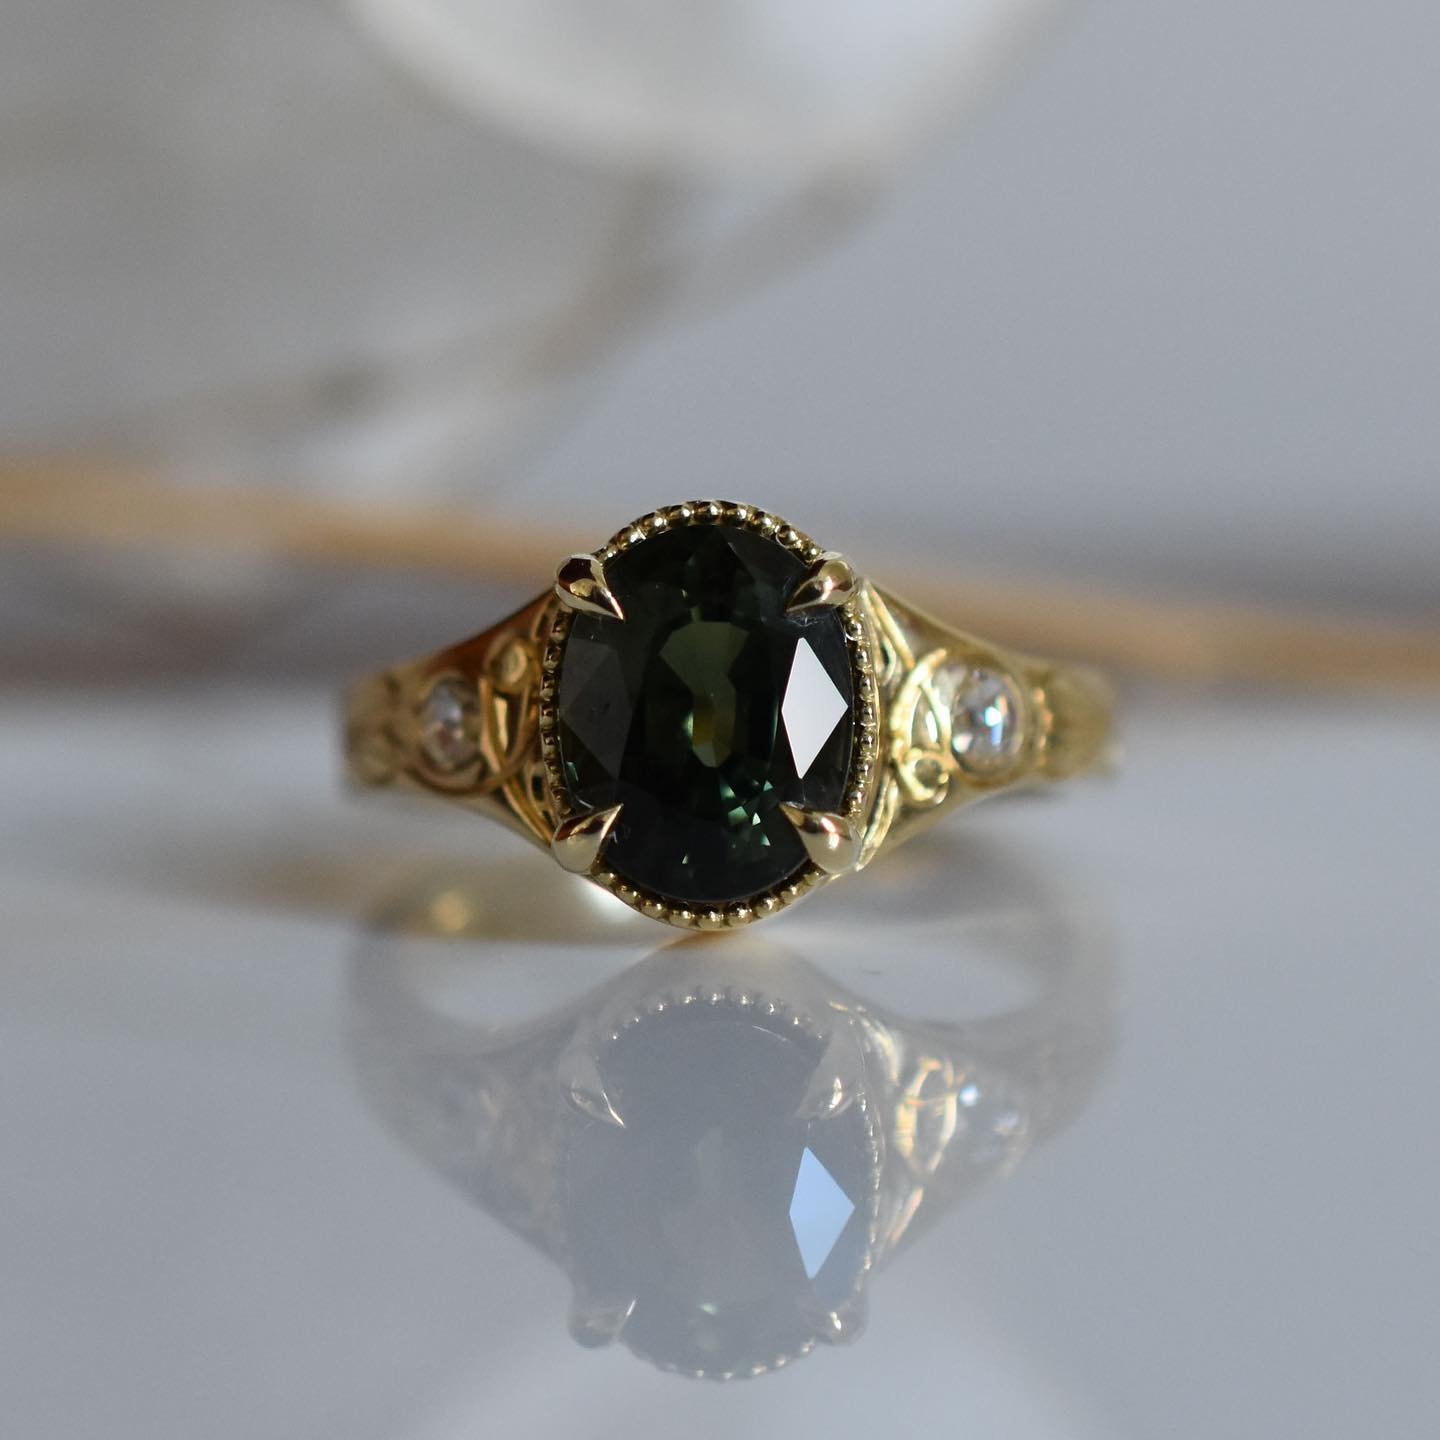 ✨Ivy ✨✨ 2.83ct green sapphire coming very soon to my website. 
Until then, if you are interested, please DM. She&rsquo;s soooooooooooo pretty!
.
.
.
#greensapphires #green #handengraved #vintageinspired #antiqueinspired #vancouvercustomgoldsmith